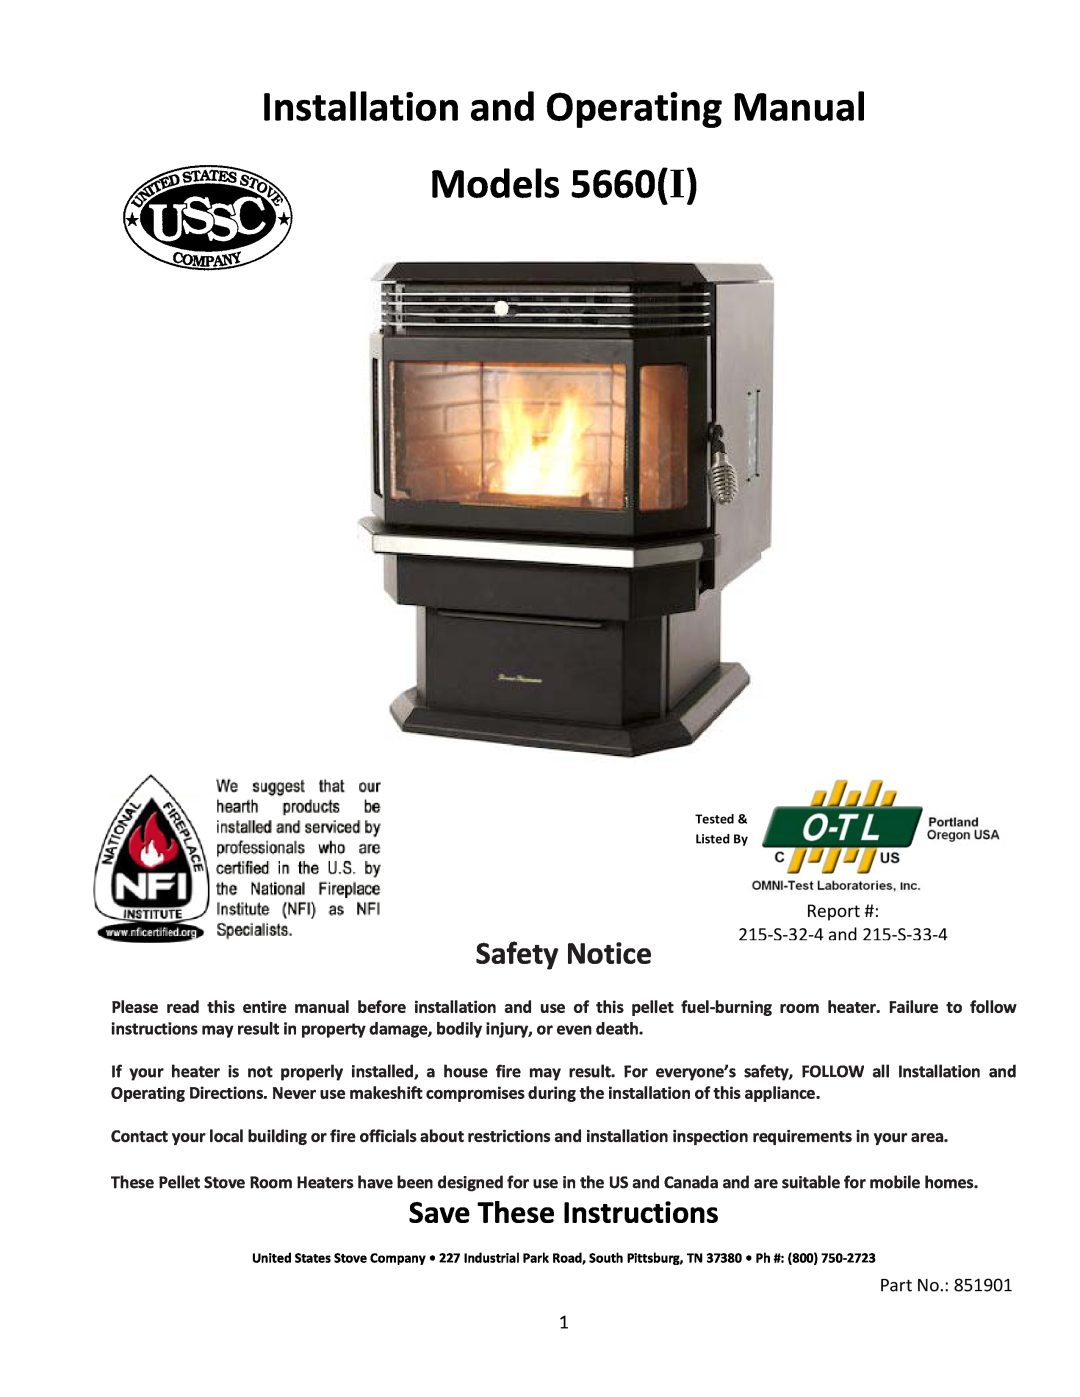 United States Stove 5660(I) manual Installation and Operating Manual Models, Save These Instructions, Safety Notice 